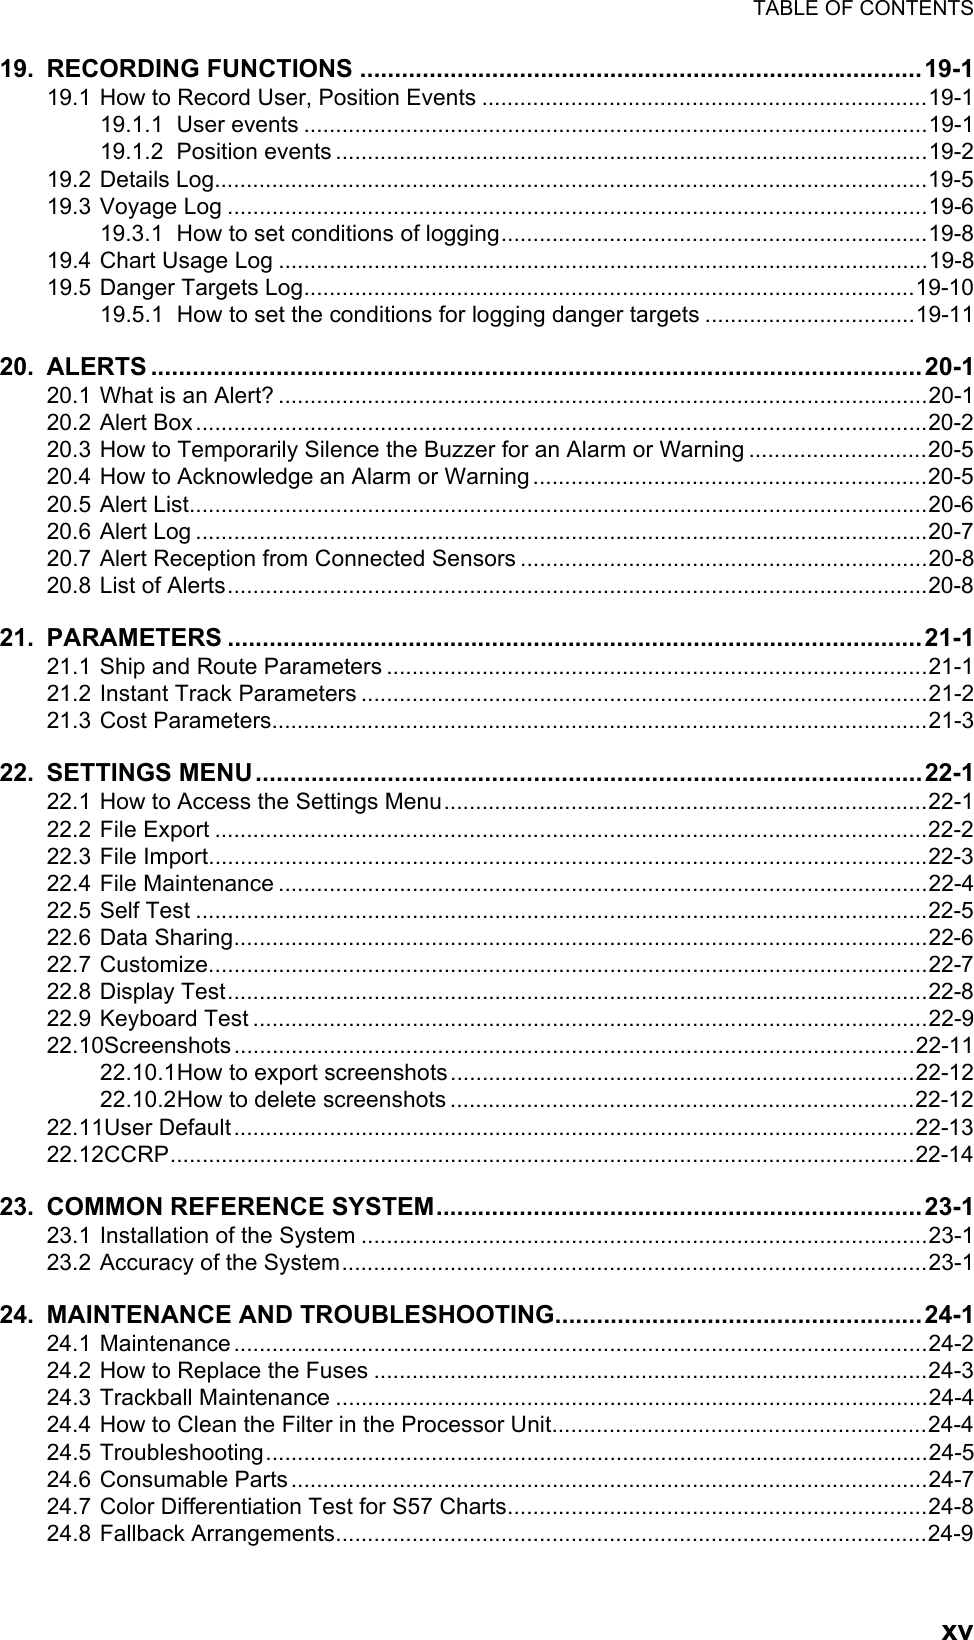 TABLE OF CONTENTSxv19. RECORDING FUNCTIONS .................................................................................19-119.1 How to Record User, Position Events ......................................................................19-119.1.1 User events ..................................................................................................19-119.1.2 Position events .............................................................................................19-219.2 Details Log................................................................................................................19-519.3 Voyage Log ..............................................................................................................19-619.3.1 How to set conditions of logging...................................................................19-819.4 Chart Usage Log ......................................................................................................19-819.5 Danger Targets Log................................................................................................19-1019.5.1 How to set the conditions for logging danger targets .................................19-1120. ALERTS ...............................................................................................................20-120.1 What is an Alert? ......................................................................................................20-120.2 Alert Box...................................................................................................................20-220.3 How to Temporarily Silence the Buzzer for an Alarm or Warning ............................20-520.4 How to Acknowledge an Alarm or Warning..............................................................20-520.5 Alert List....................................................................................................................20-620.6 Alert Log ...................................................................................................................20-720.7 Alert Reception from Connected Sensors ................................................................20-820.8 List of Alerts..............................................................................................................20-821. PARAMETERS ....................................................................................................21-121.1 Ship and Route Parameters .....................................................................................21-121.2 Instant Track Parameters .........................................................................................21-221.3 Cost Parameters.......................................................................................................21-322. SETTINGS MENU................................................................................................22-122.1 How to Access the Settings Menu............................................................................22-122.2 File Export ................................................................................................................22-222.3 File Import.................................................................................................................22-322.4 File Maintenance ......................................................................................................22-422.5 Self Test ...................................................................................................................22-522.6 Data Sharing.............................................................................................................22-622.7 Customize.................................................................................................................22-722.8 Display Test..............................................................................................................22-822.9 Keyboard Test ..........................................................................................................22-922.10Screenshots...........................................................................................................22-1122.10.1How to export screenshots.........................................................................22-1222.10.2How to delete screenshots .........................................................................22-1222.11User Default...........................................................................................................22-1322.12CCRP.....................................................................................................................22-1423. COMMON REFERENCE SYSTEM......................................................................23-123.1 Installation of the System .........................................................................................23-123.2 Accuracy of the System............................................................................................23-124. MAINTENANCE AND TROUBLESHOOTING.....................................................24-124.1 Maintenance.............................................................................................................24-224.2 How to Replace the Fuses .......................................................................................24-324.3 Trackball Maintenance .............................................................................................24-424.4 How to Clean the Filter in the Processor Unit...........................................................24-424.5 Troubleshooting........................................................................................................24-524.6 Consumable Parts ....................................................................................................24-724.7 Color Differentiation Test for S57 Charts..................................................................24-824.8 Fallback Arrangements.............................................................................................24-9